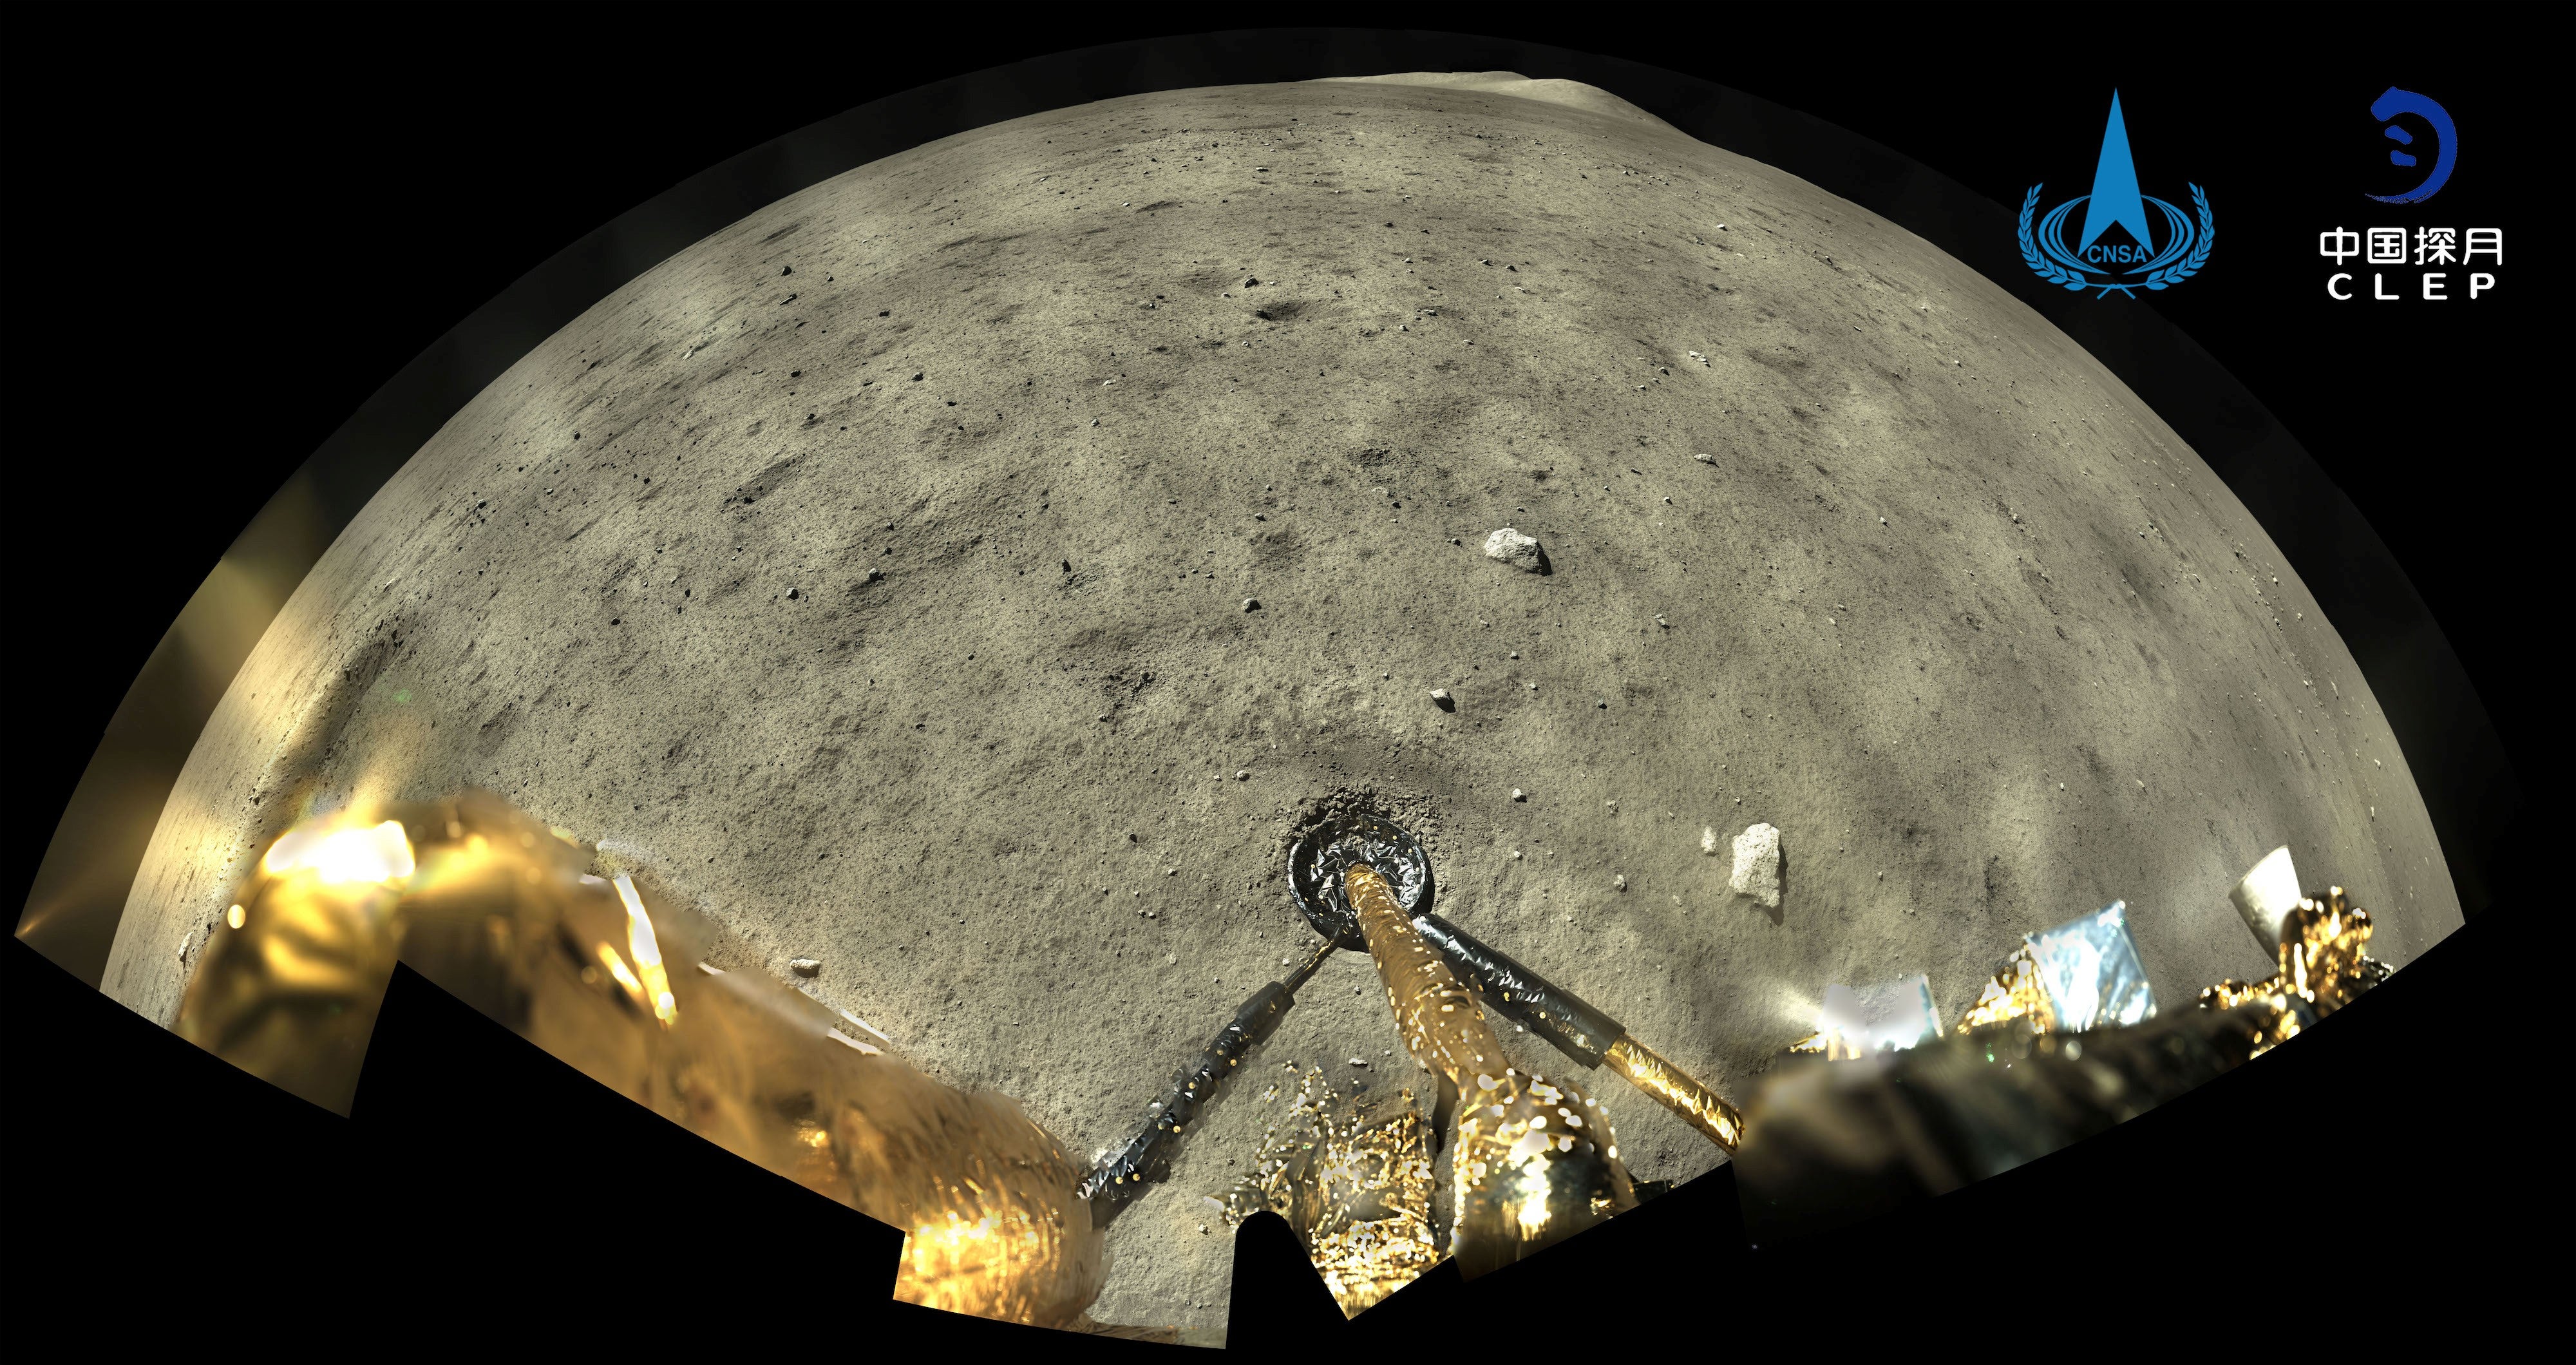 File: Picture taken of the Chang’e-5 spacecraft after landing on the Moon